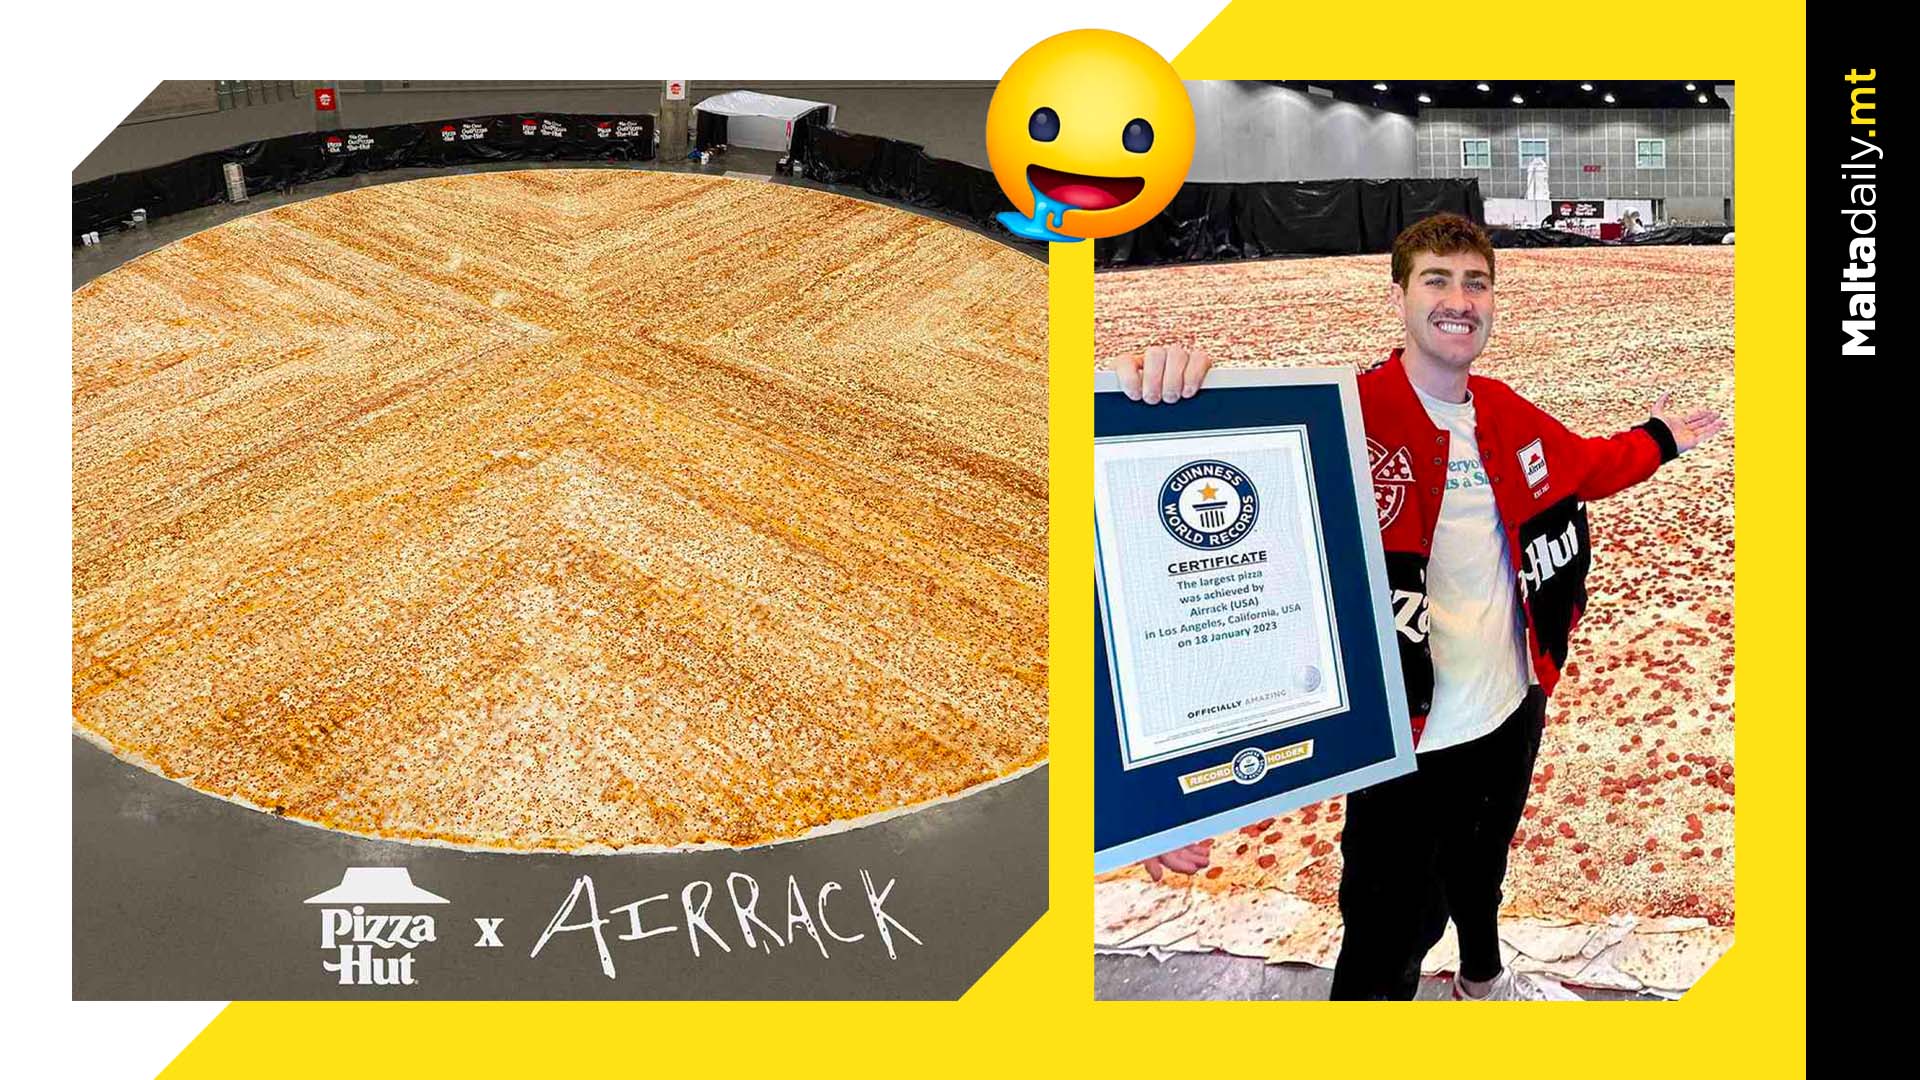 Pizza Hut just broke the world record for largest pizza ever